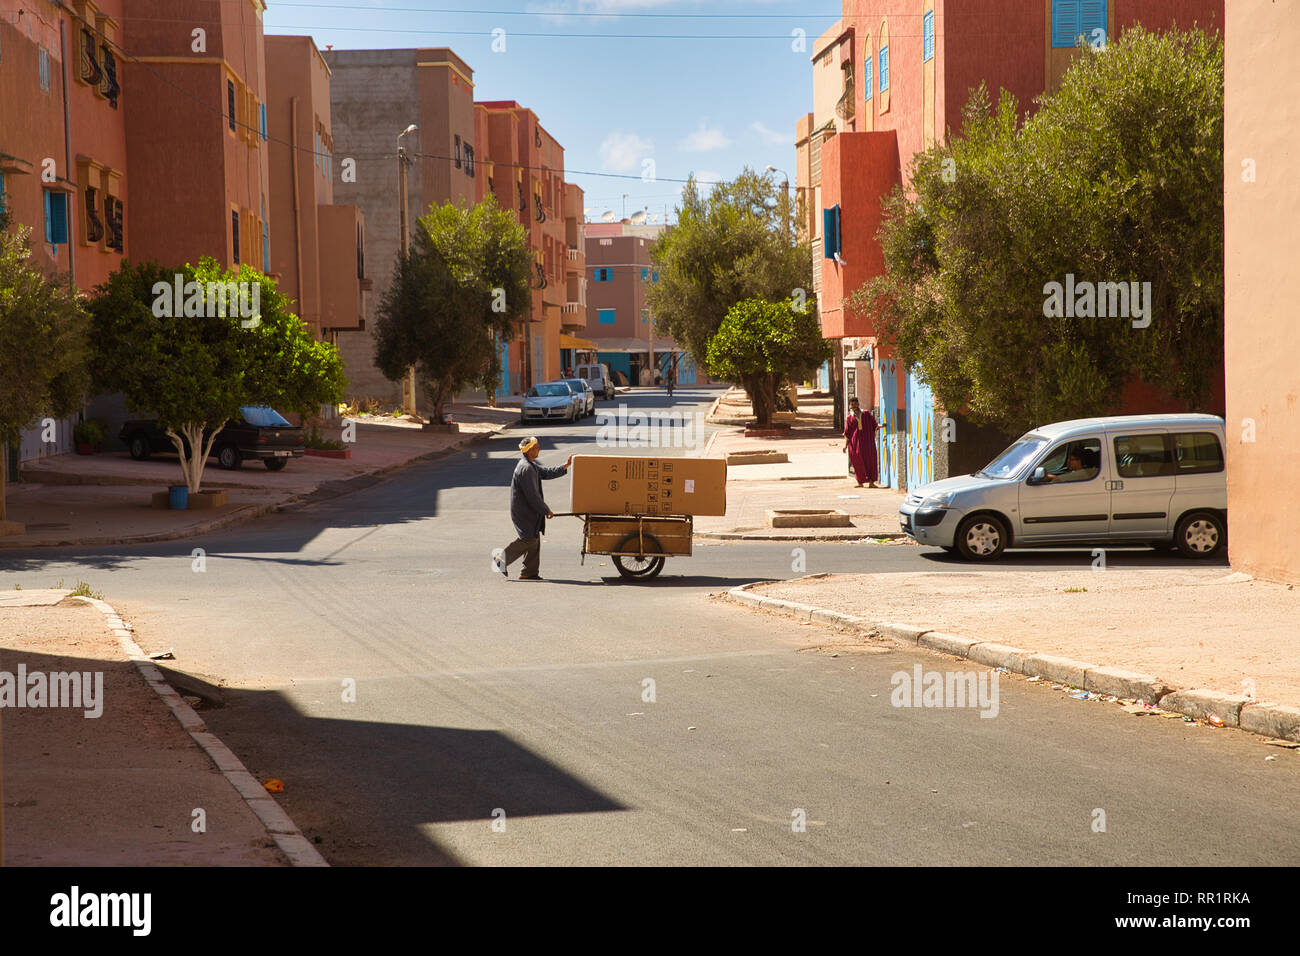 Streets of the Moroccan town Tiznit, Morocco 2017 Stock Photo